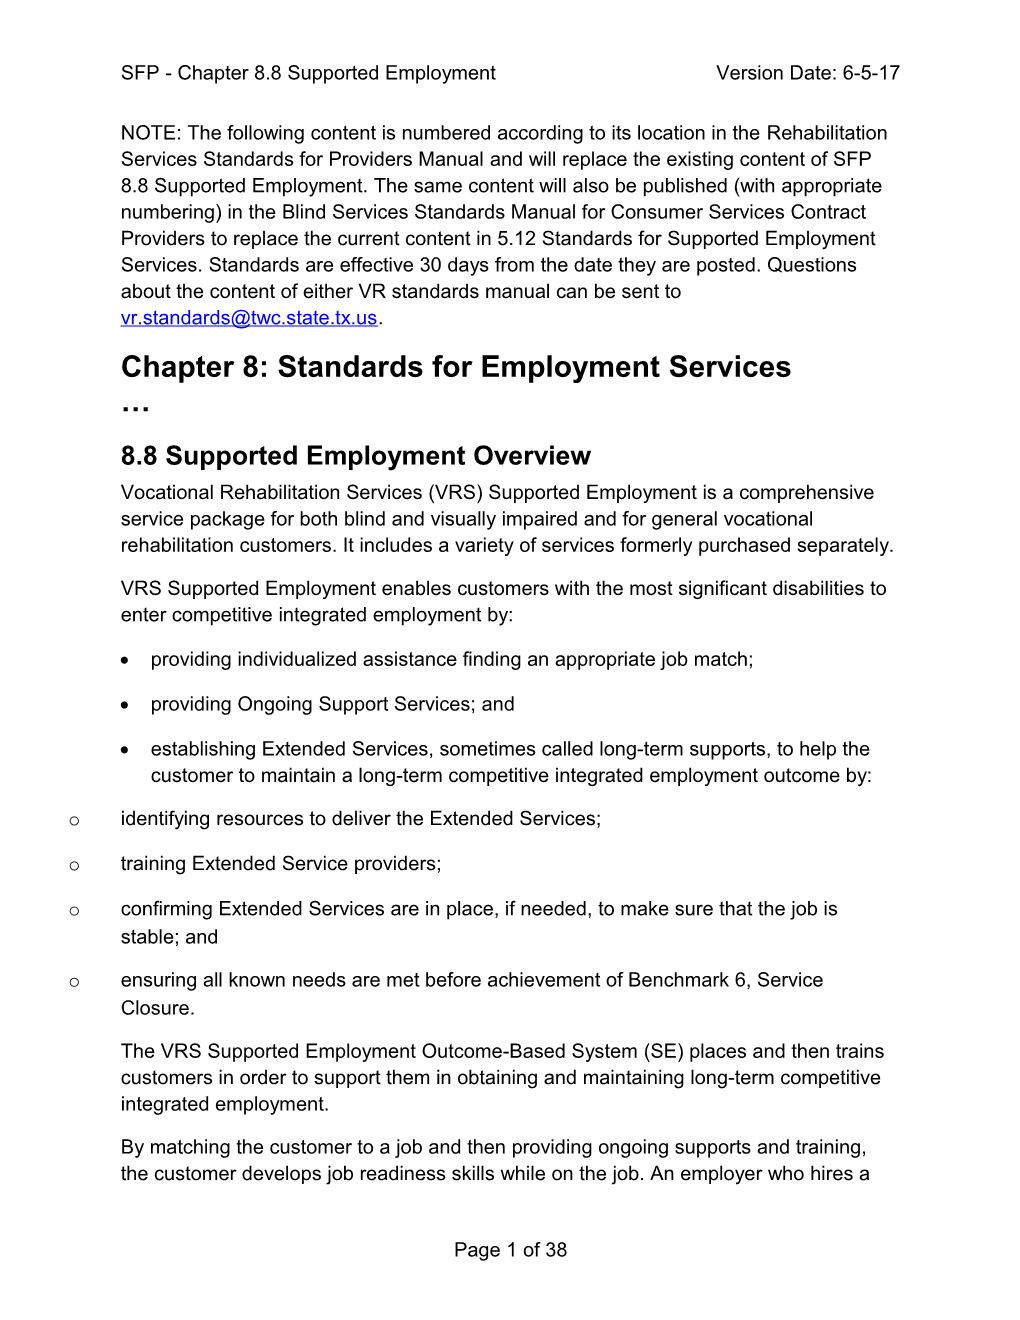 SFP - Chapter 8.8 Supported Employment Version Date: 6-5-17